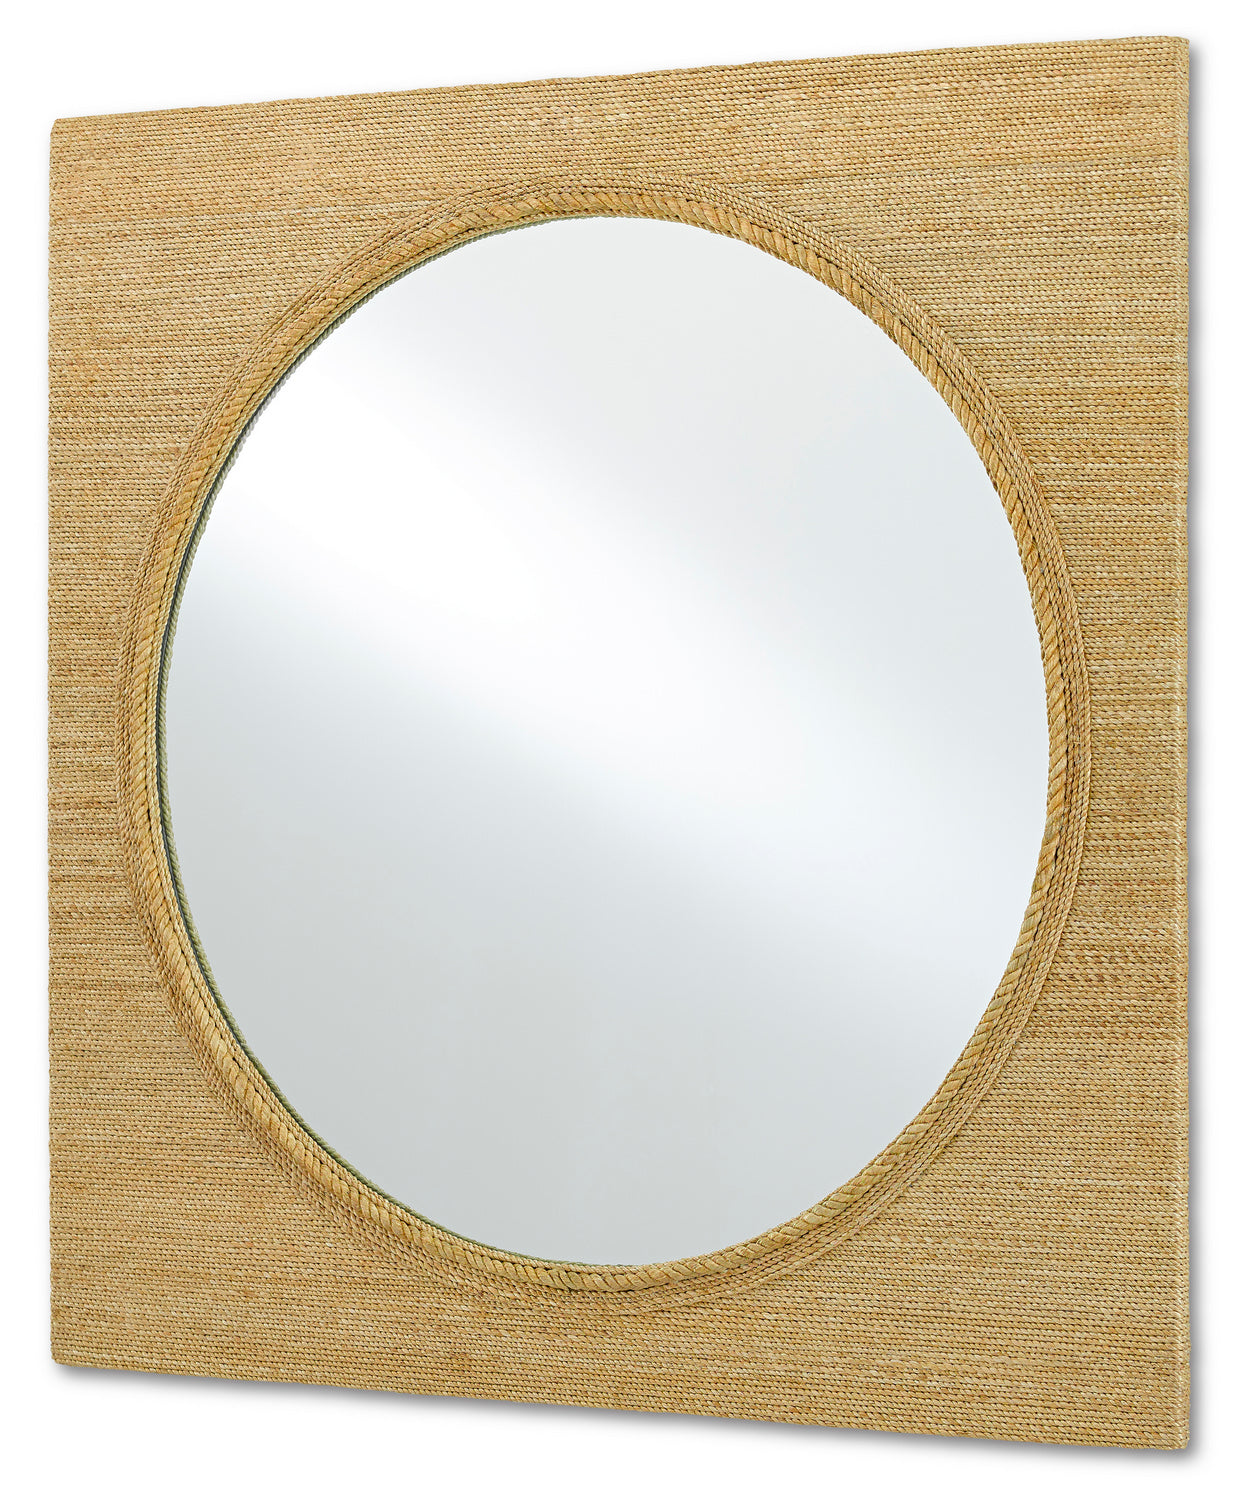 Mirror from the Tisbury collection in Natural/Mirror finish